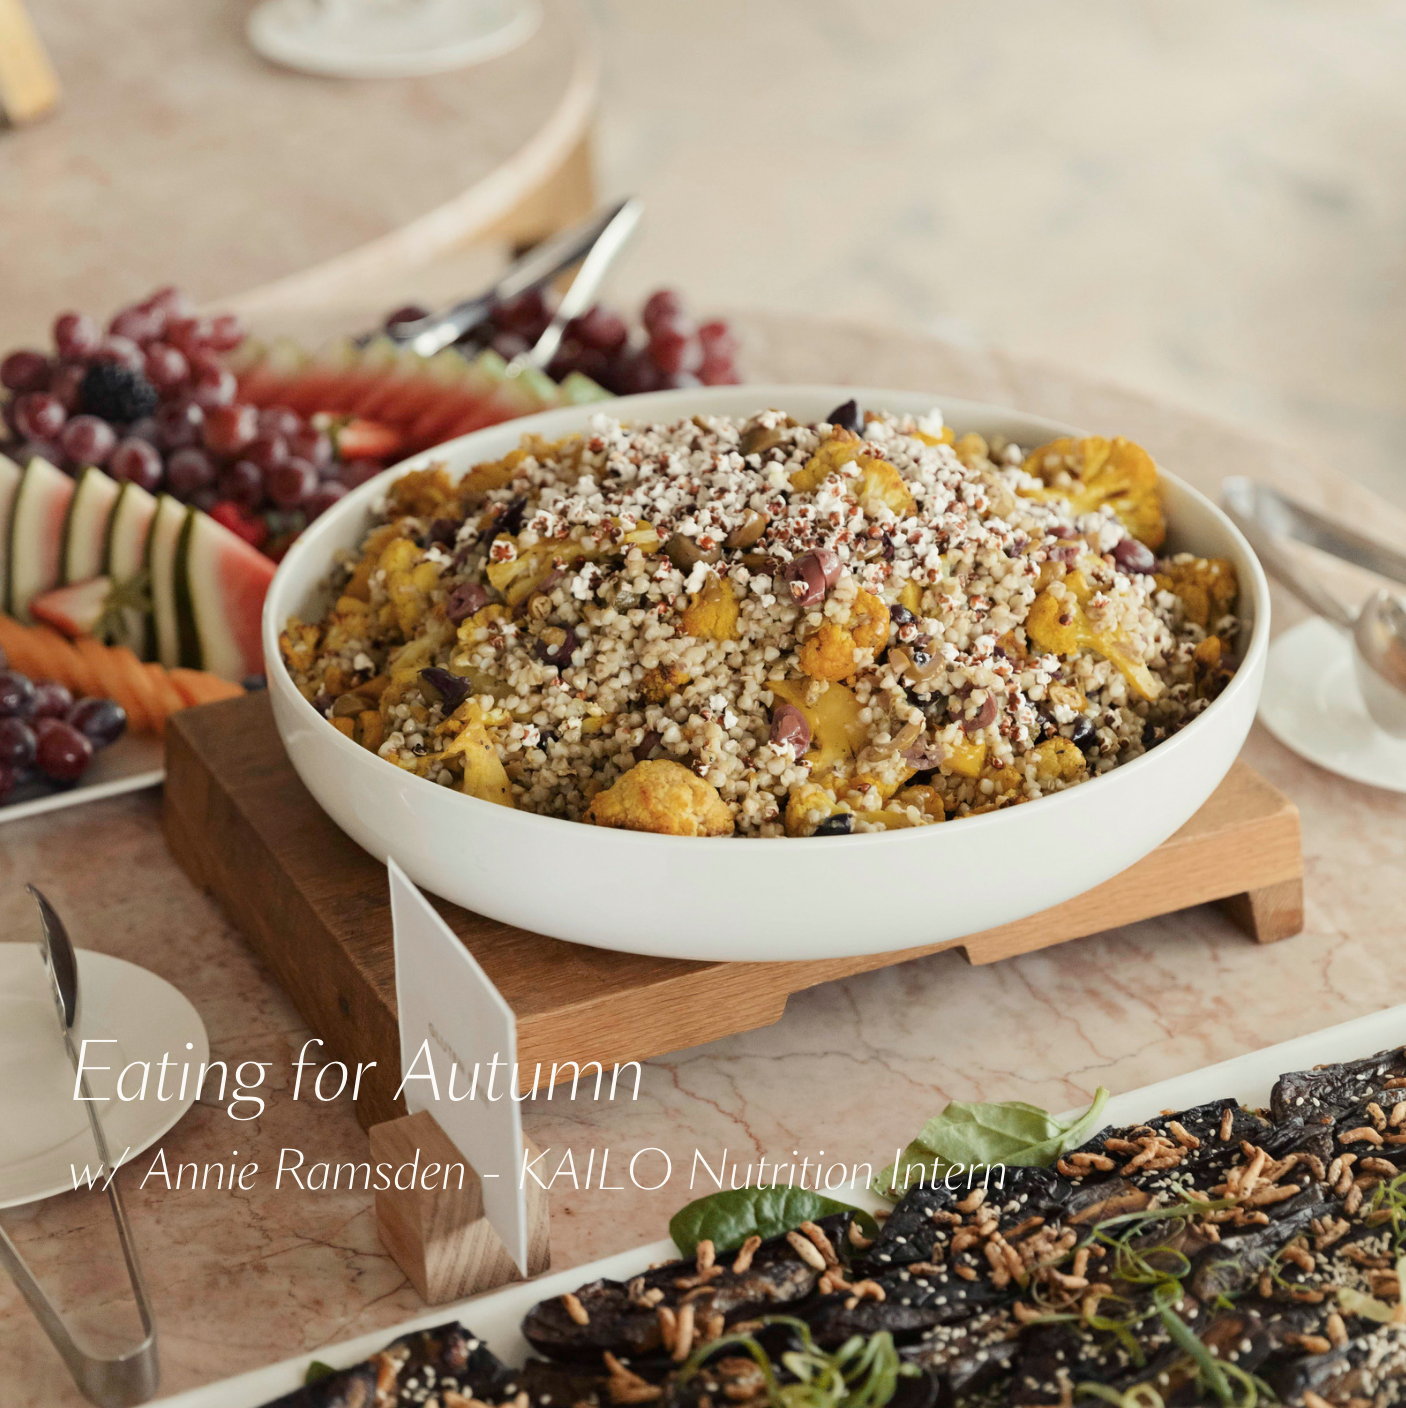 KAILO Nutrition Intern Annie talks about how to eat for Autumn!